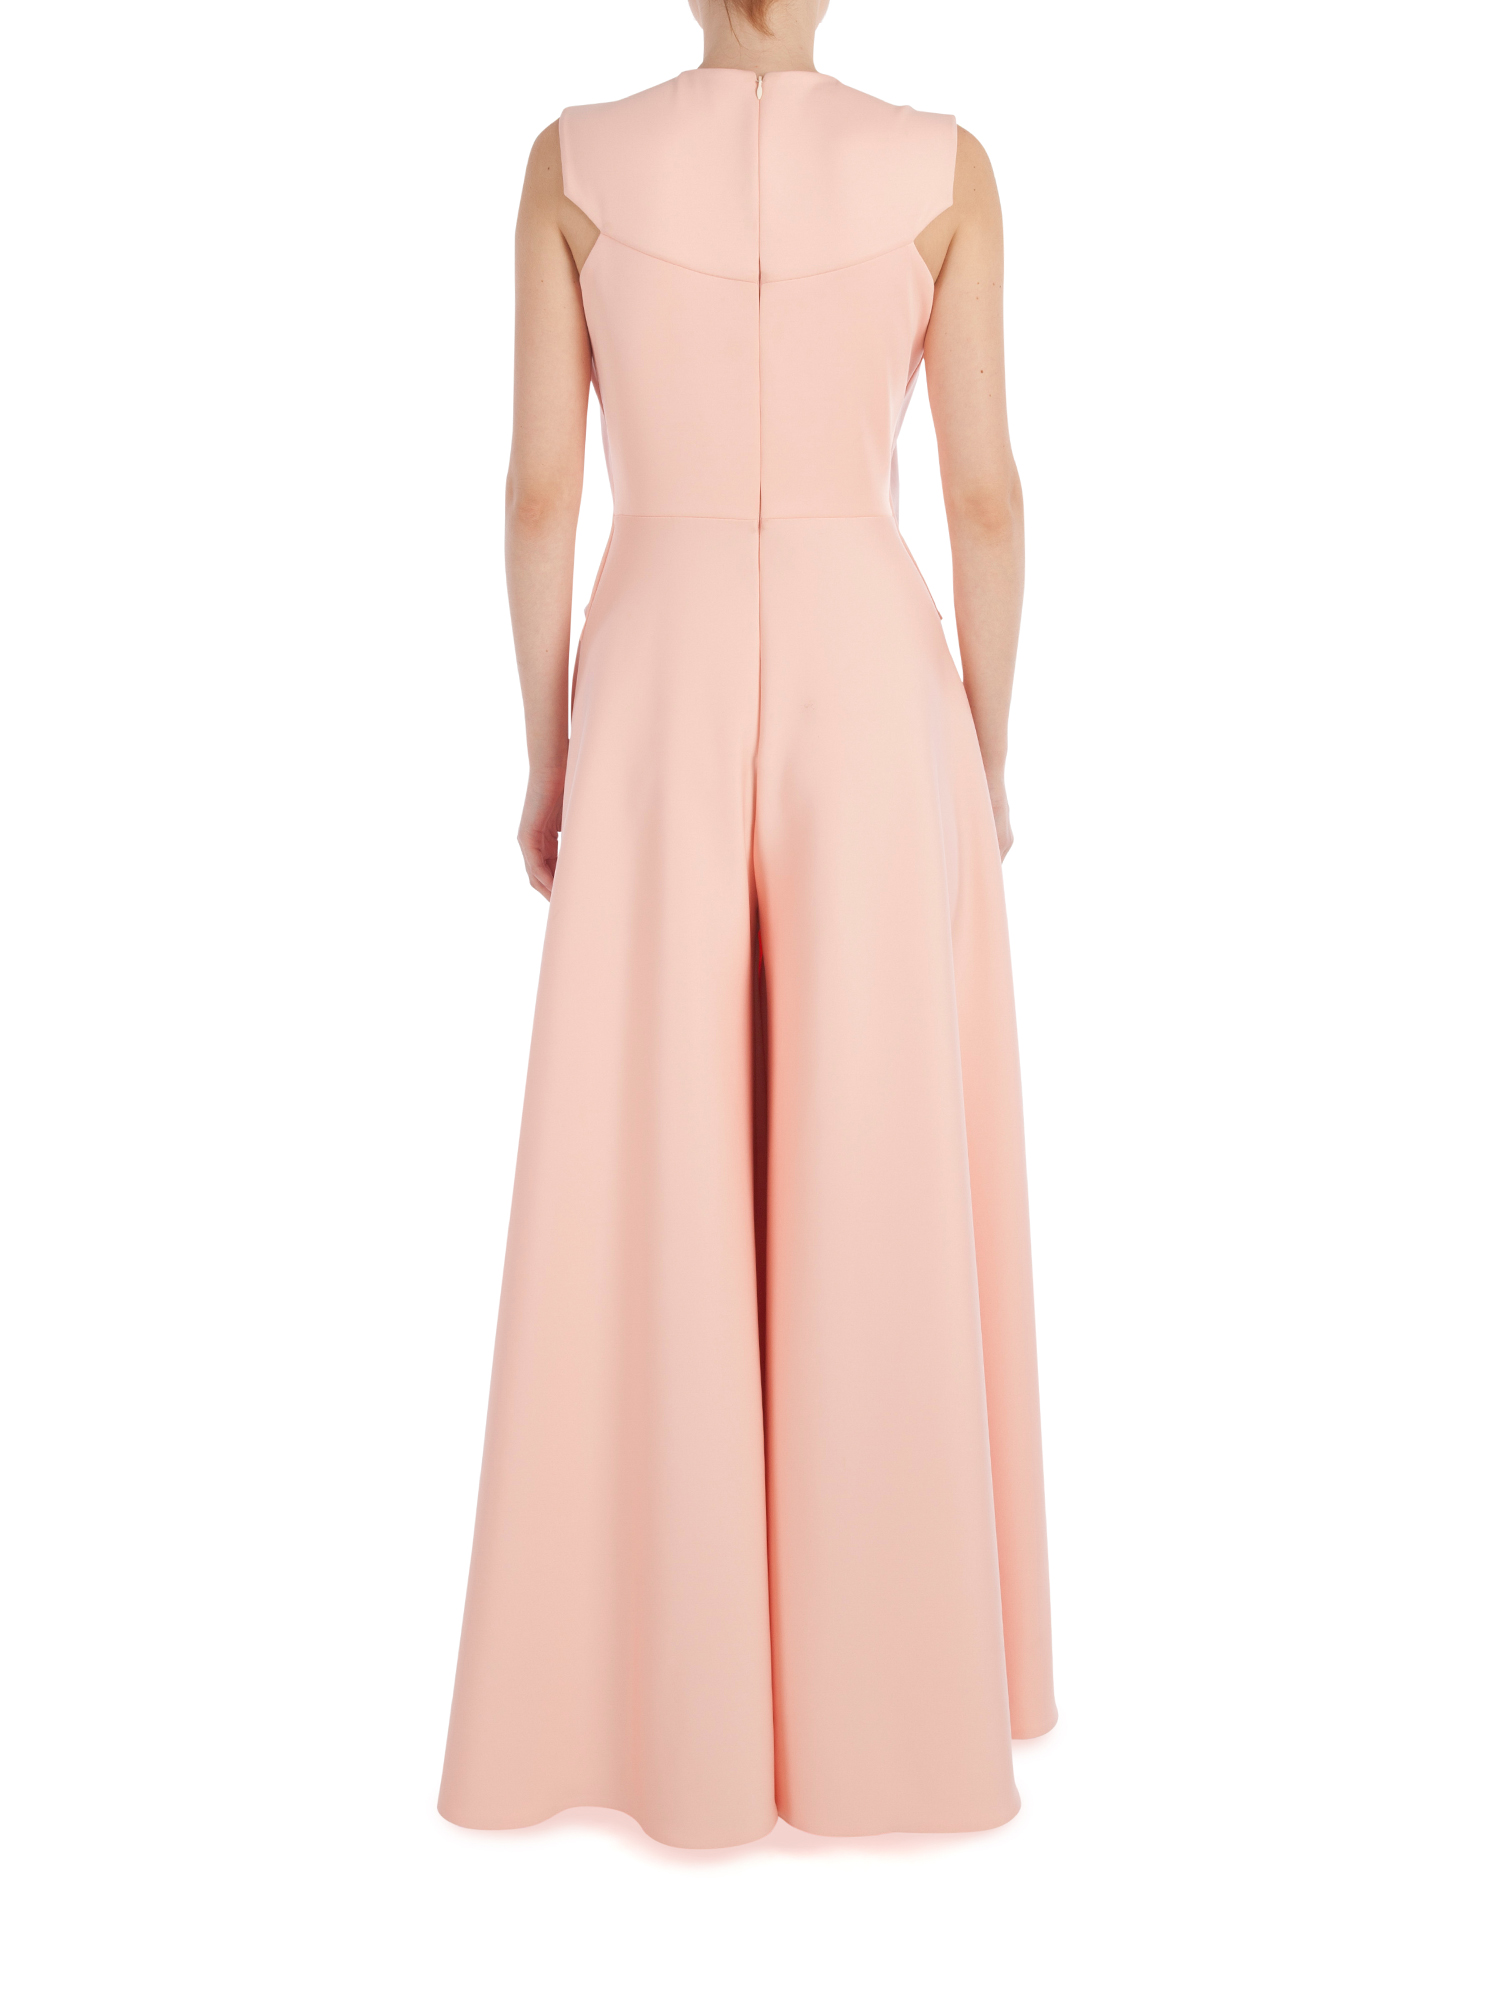 Peach structured layered gown by Dolly J | The Secret Label